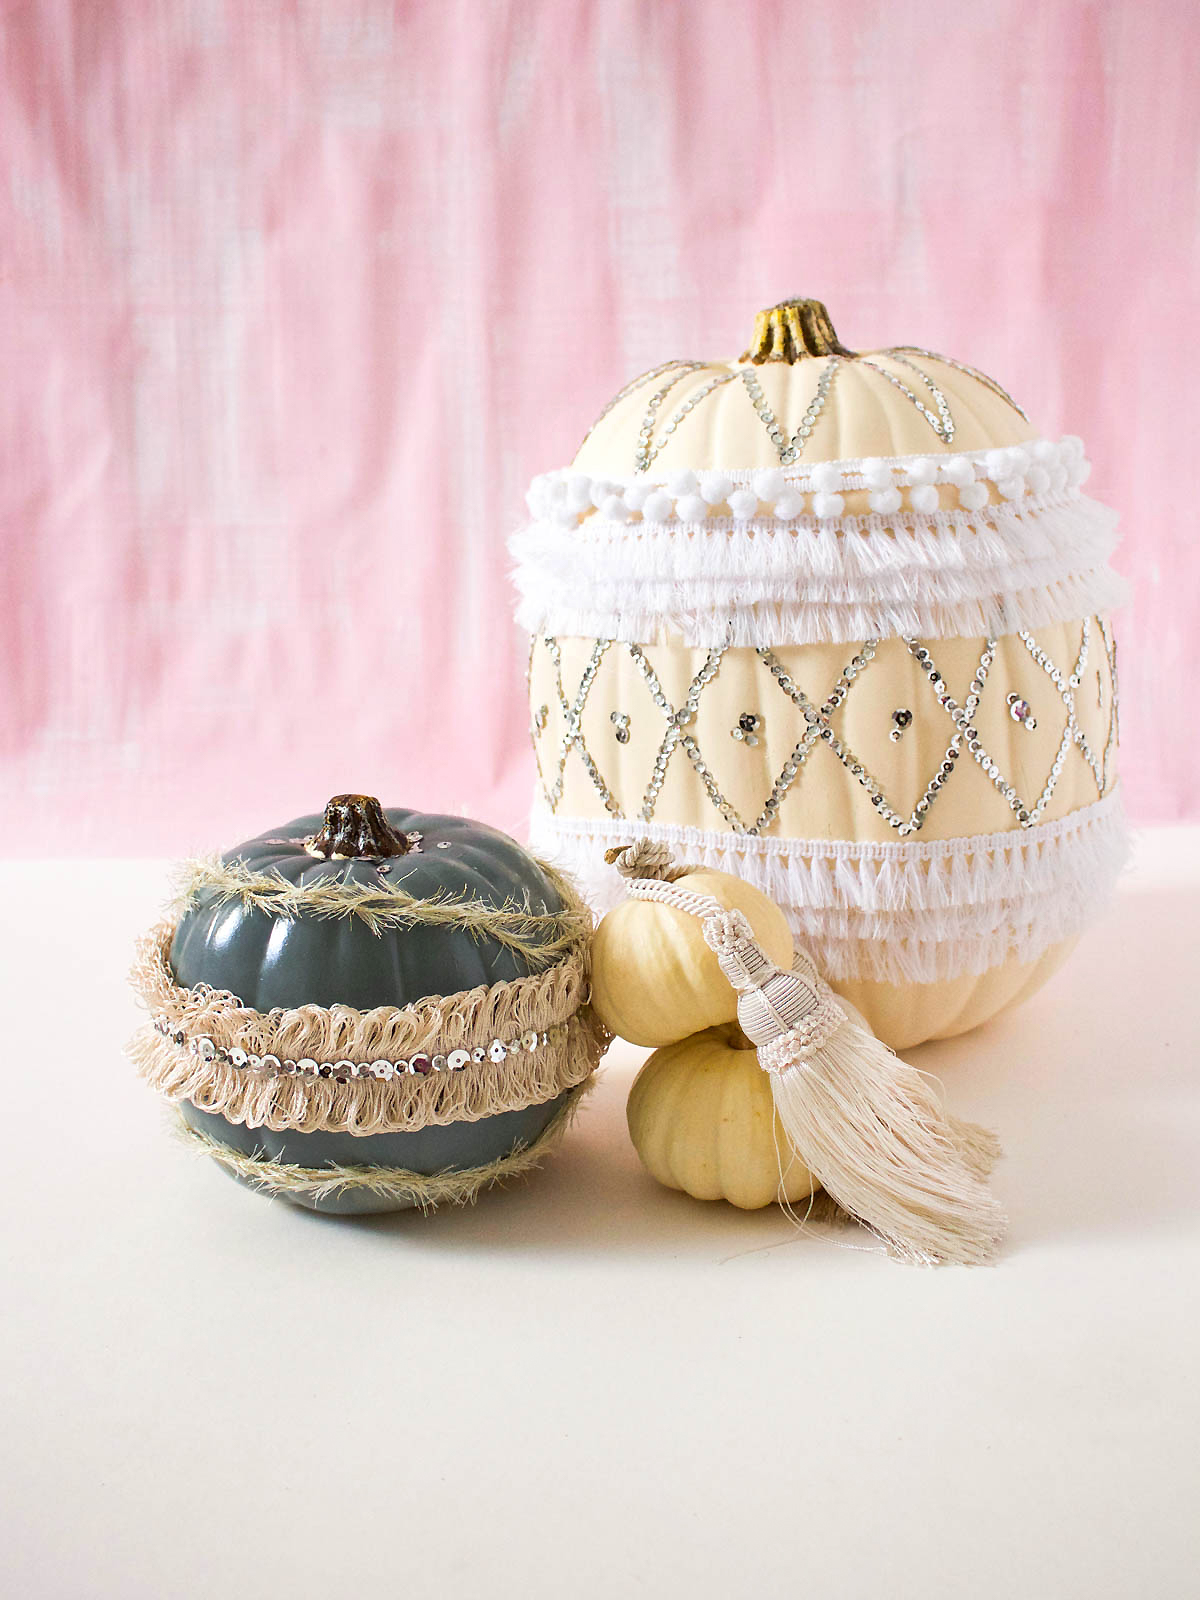 Make it a Sparkly Halloween With This DIY Moroccan Style Sequin Pumpkin | Fish & Bull